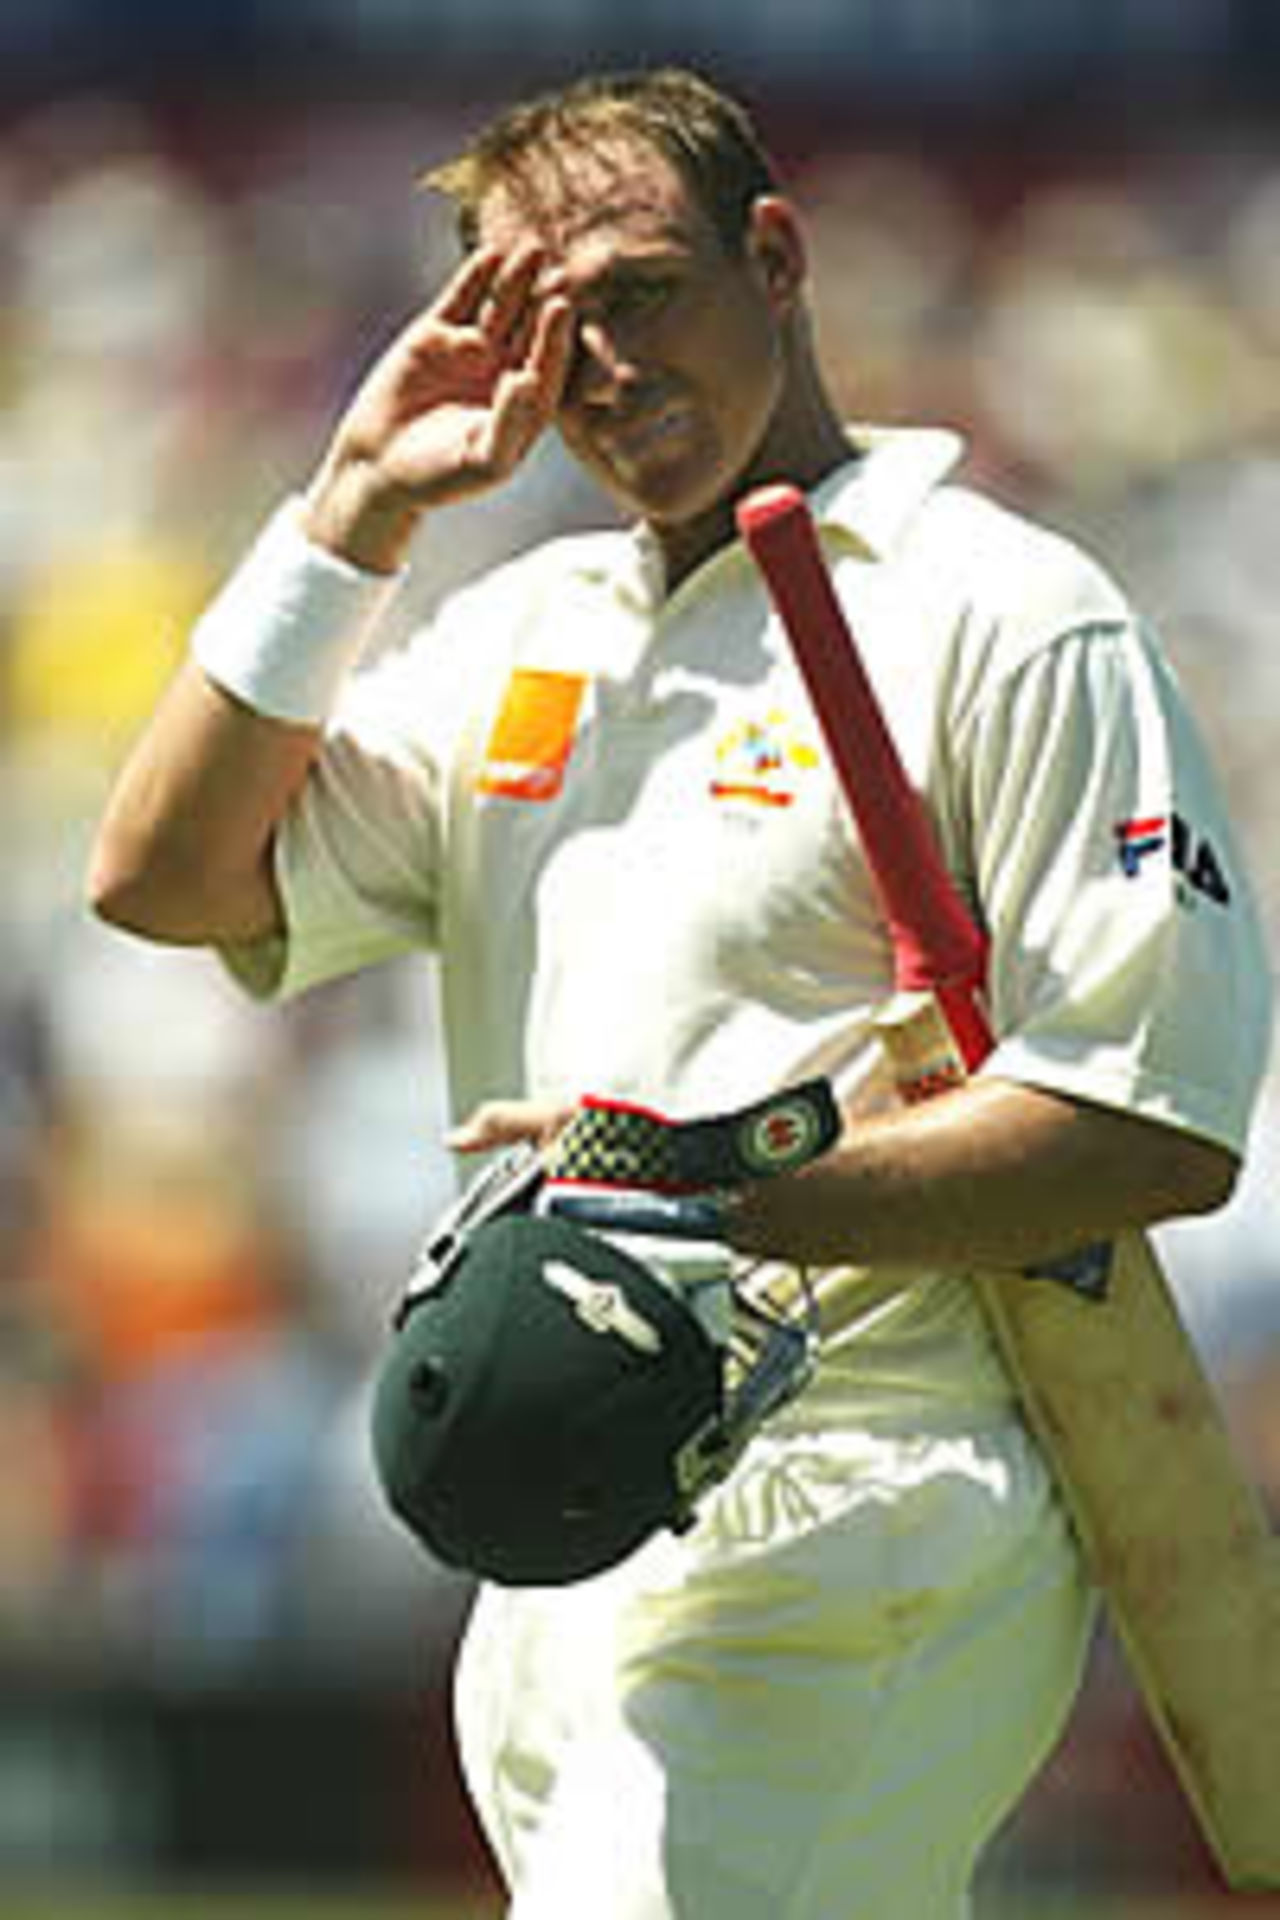 ADELAIDE - NOVEMBER 22: Matthew Hayden of Australia leaves the field after losing his wicket during day two of the second Ashes Test between Australia and England at Adelaide Oval in Adelaide, Australia, on November 22, 2002.